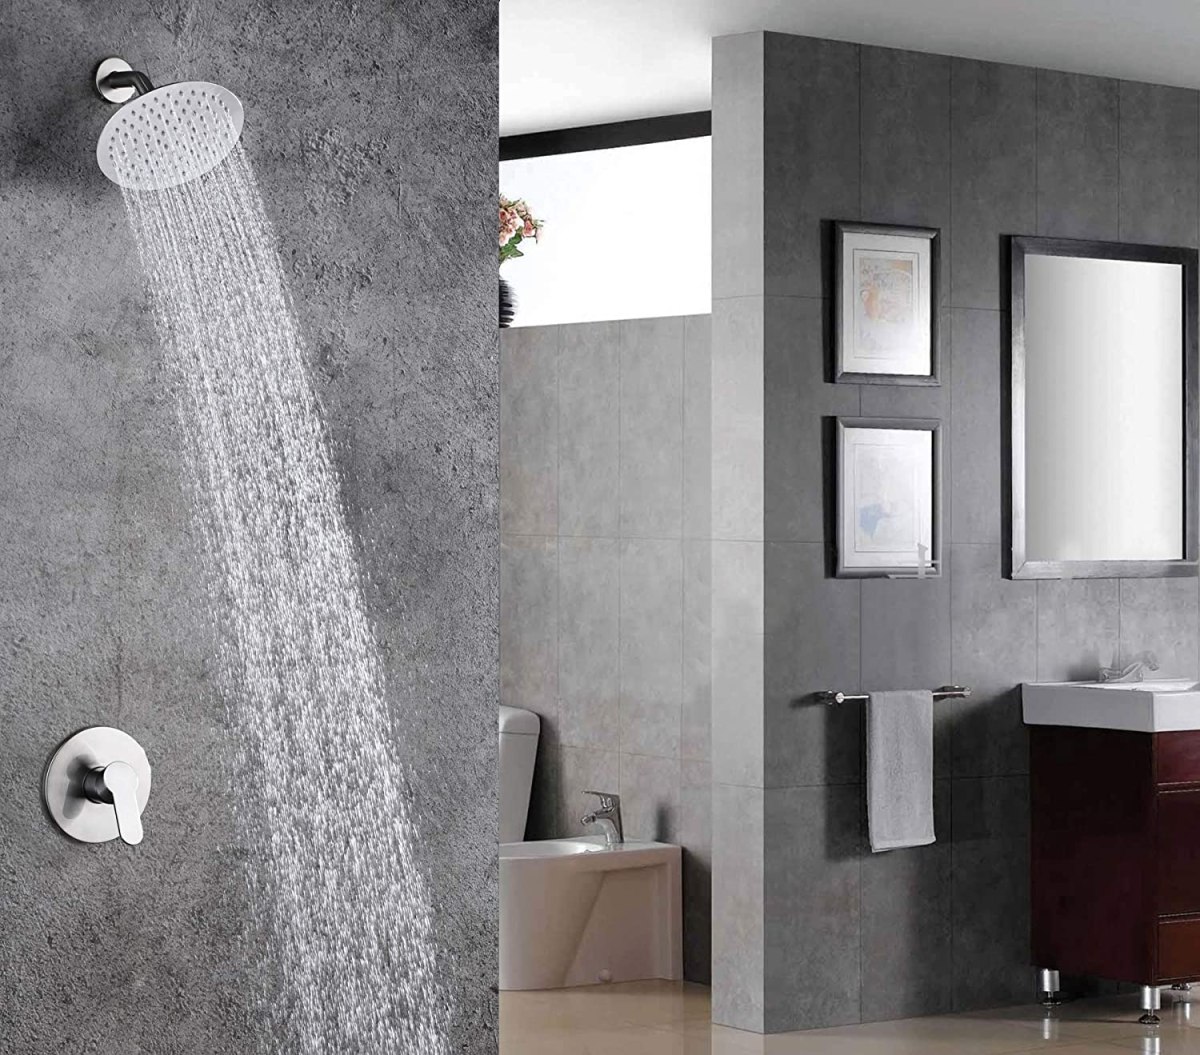 The best shower faucet option running in a large shower open to a modern bathroom